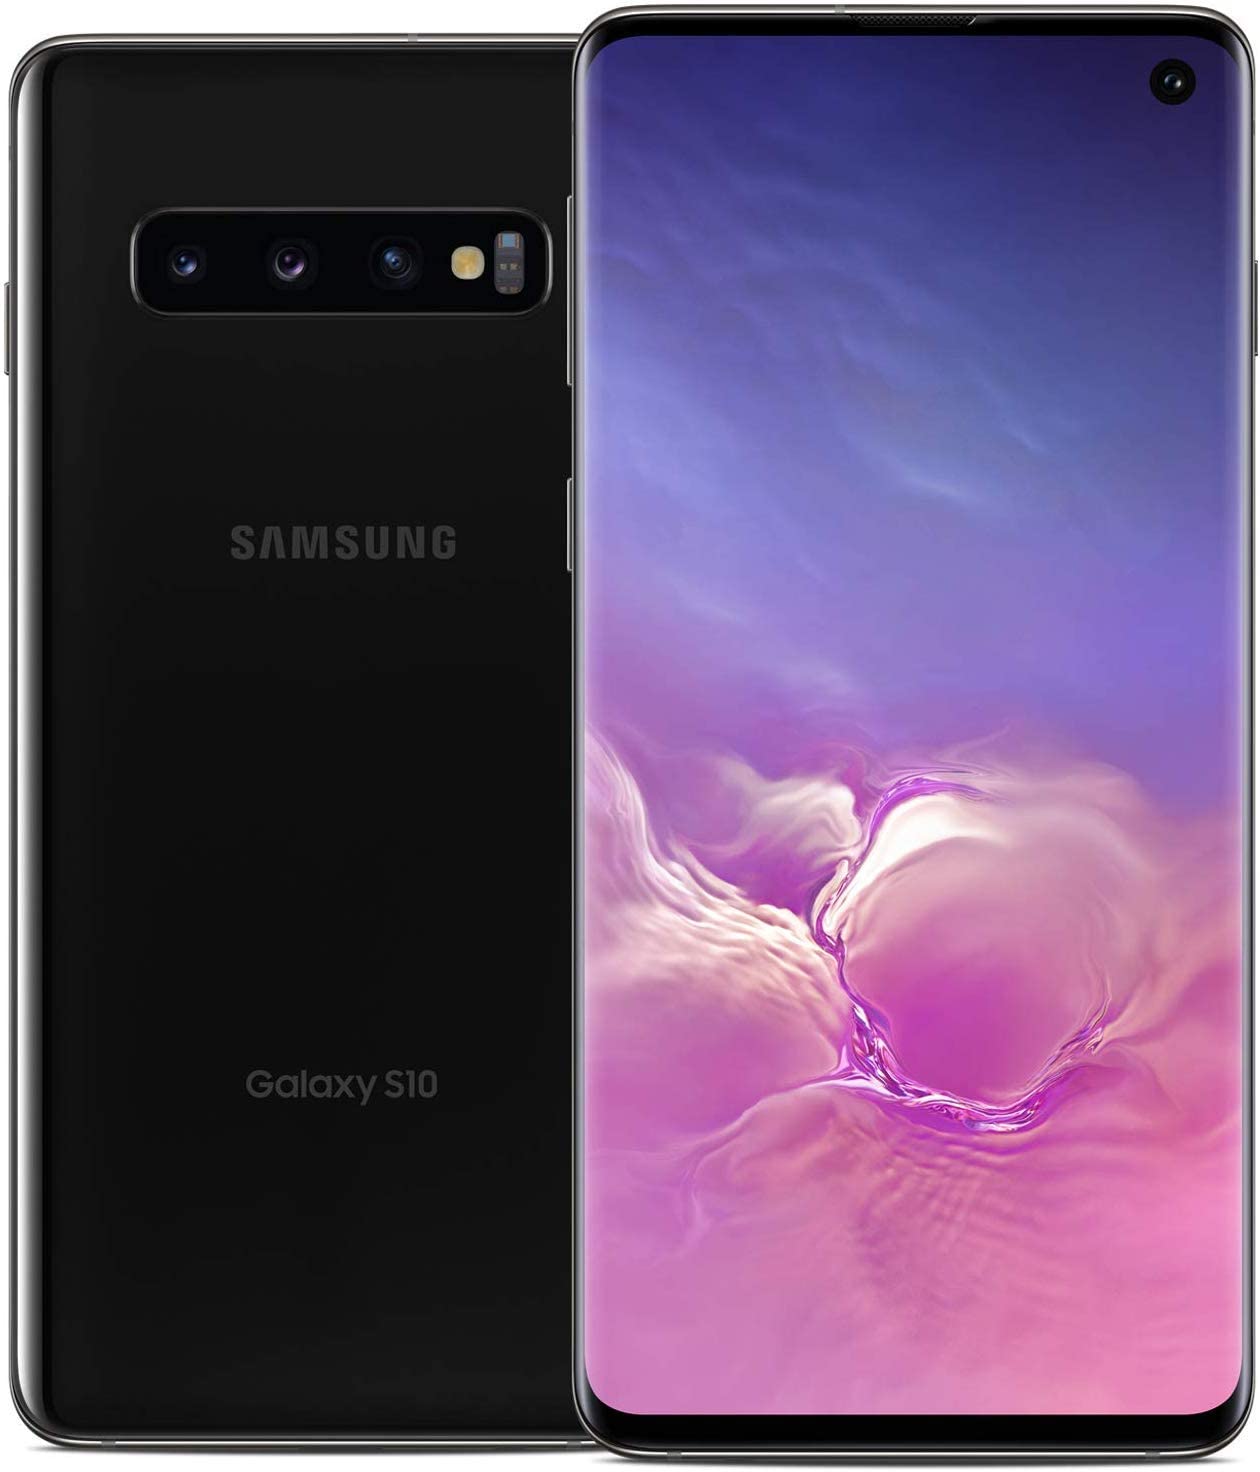 Samsung Galaxy S10 128GB 8GB Prism Black (Excellent) *Free Shipping, Case & Glass Screen Protector*